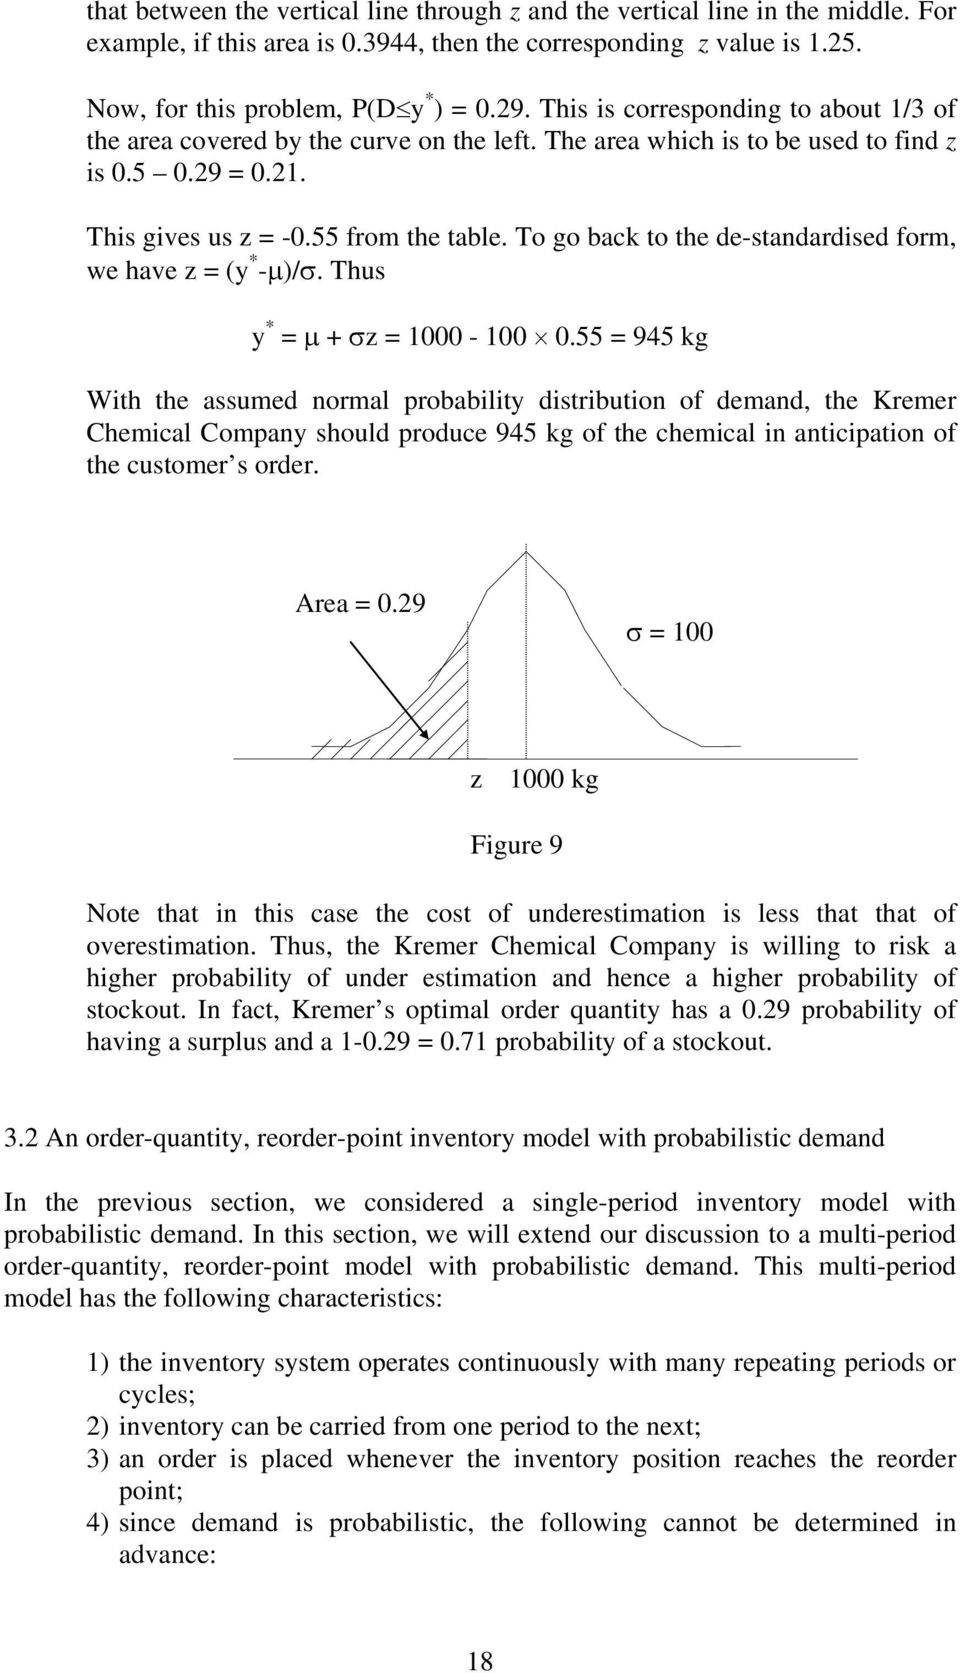 55 = 945 kg With the assumed normal probabilit distribution of demand, the Kremer Chemical Compan should produce 945 kg of the chemical in anticipation of the customer s order. Area = 0.